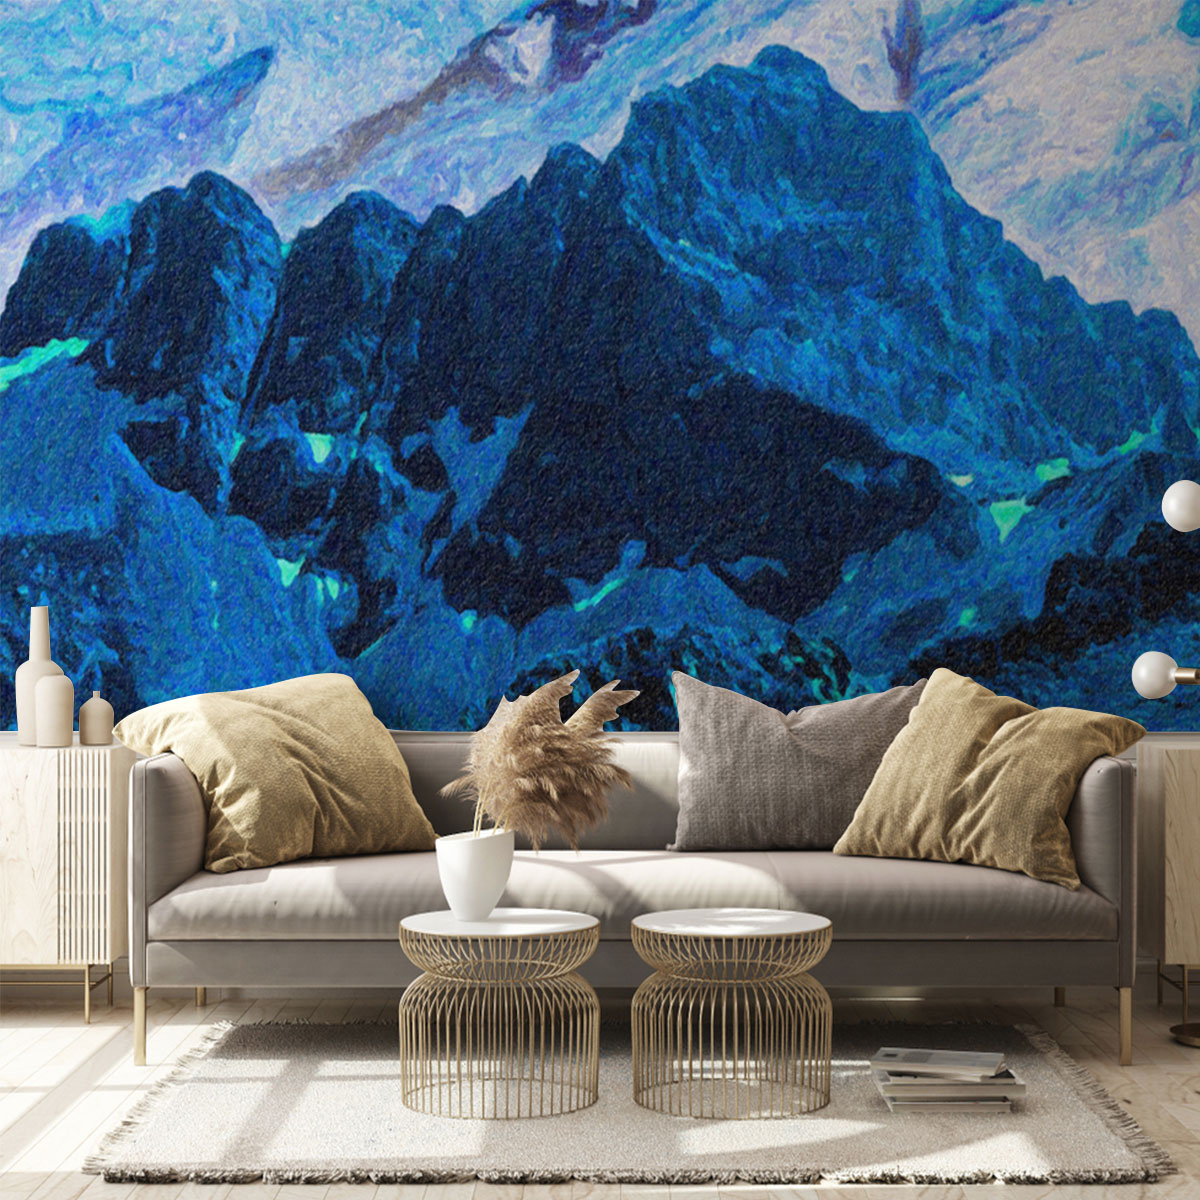 Cool Winer Abstract Wall Mural_1_2.1